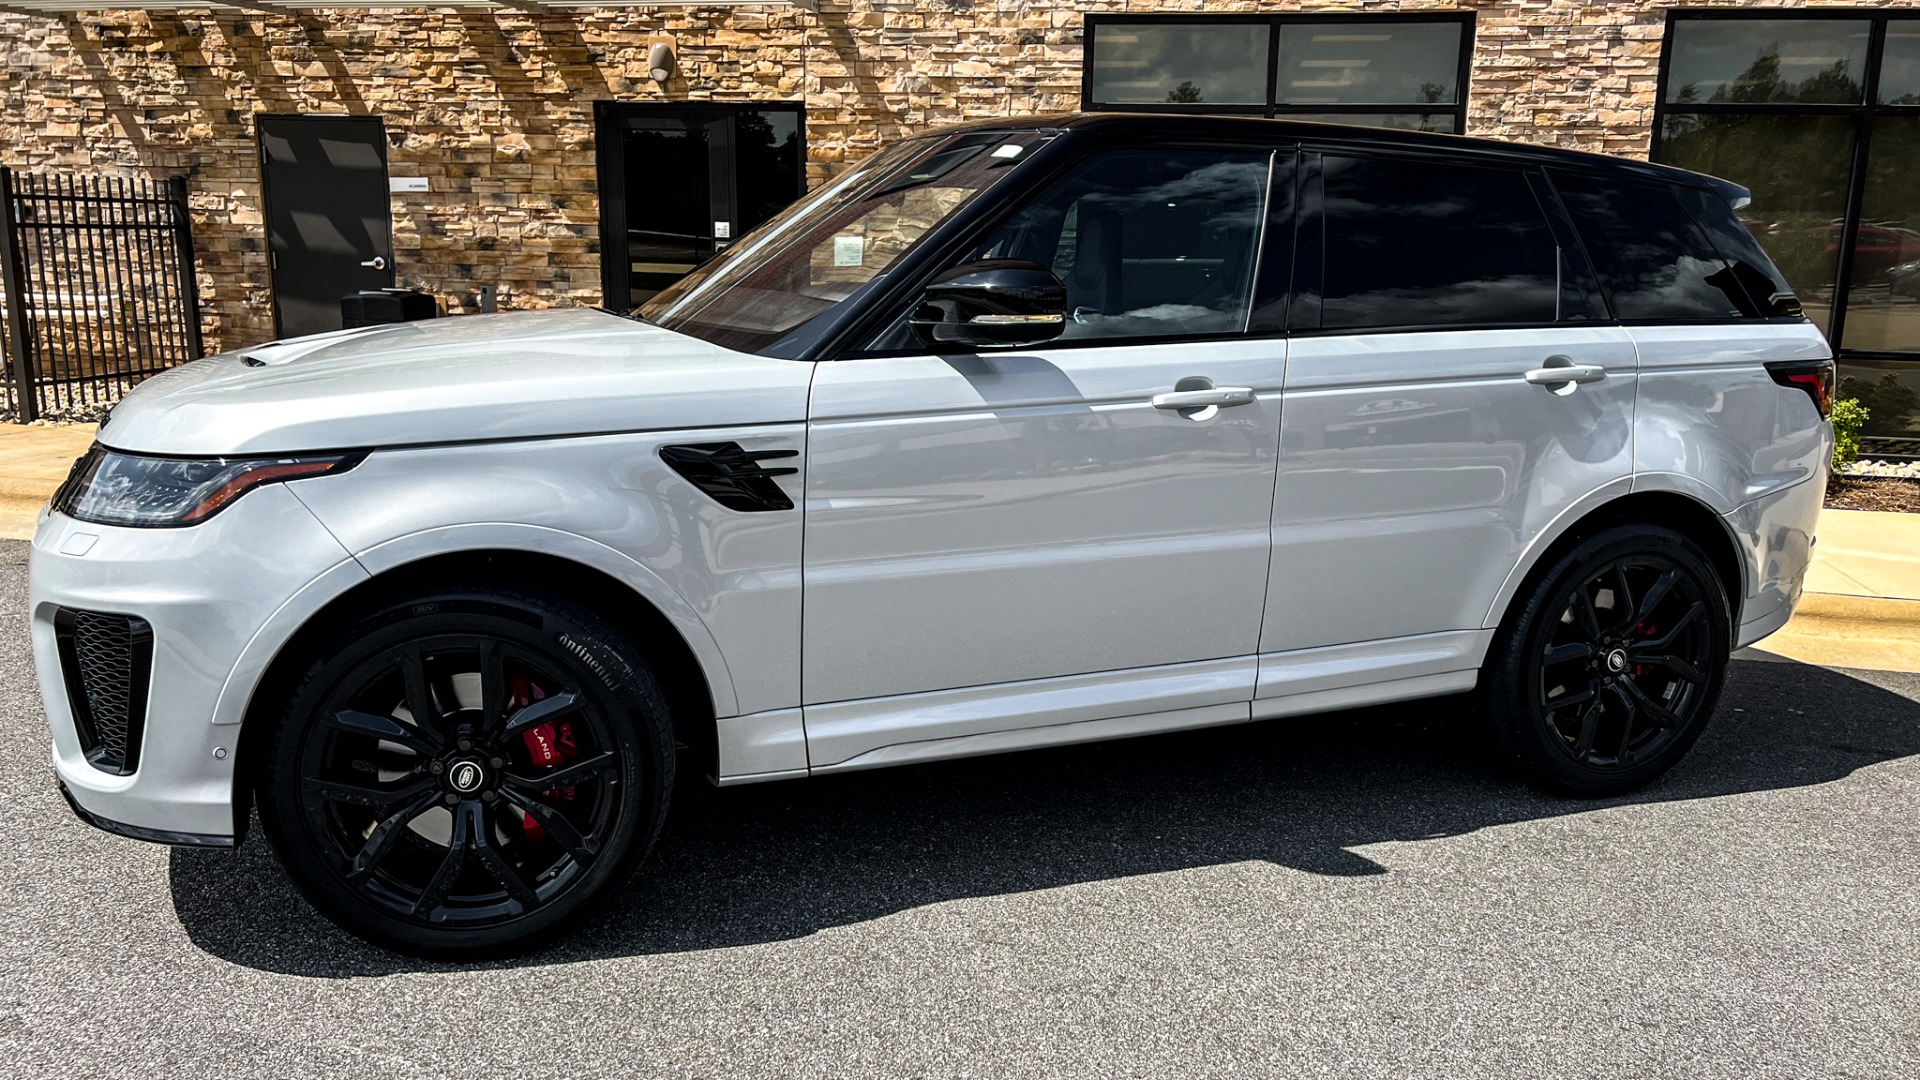 Used 2018 Land Rover Range Rover Sport SVR / SVO ULTRA METALLIC PAINT / MERIDIAN SIGNATURE / 22IN WHEELS for sale $99,995 at Formula Imports in Charlotte NC 28227 2